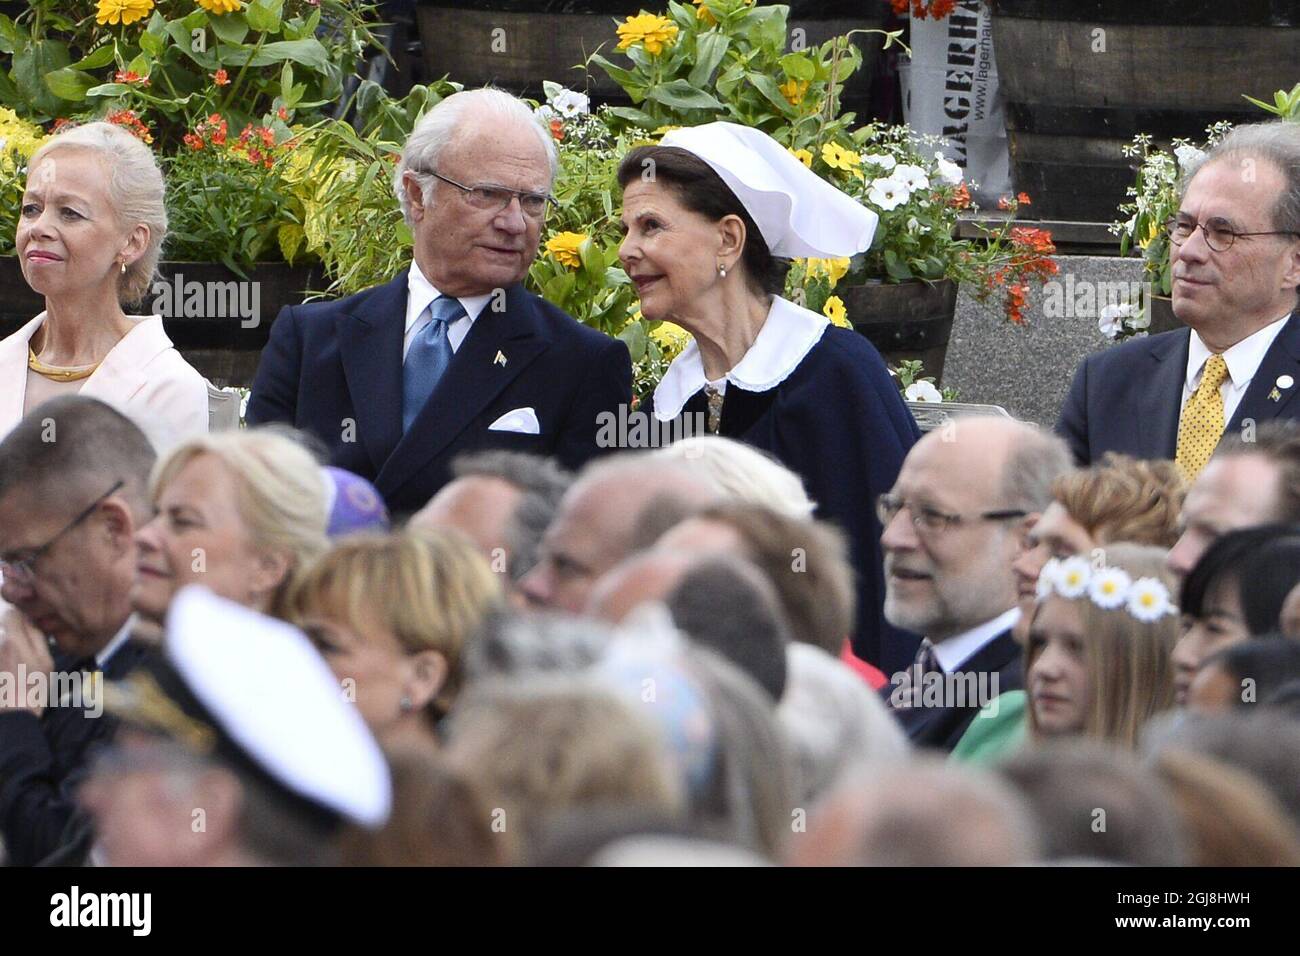 STOCKHOLM 2014-06-06 Wife of the speaker of the parliament Ylwa Westerberg, King Carl XVI Gustaf, Queen Silvia and speaker of the parliament Per Westerberg during the Swedish National Day celebrations at the Skansen open-air museum in Stockholm, Sweden, June 6, 2014. Photo: Claudio Bresciani / TT / Code 10090 Stock Photo